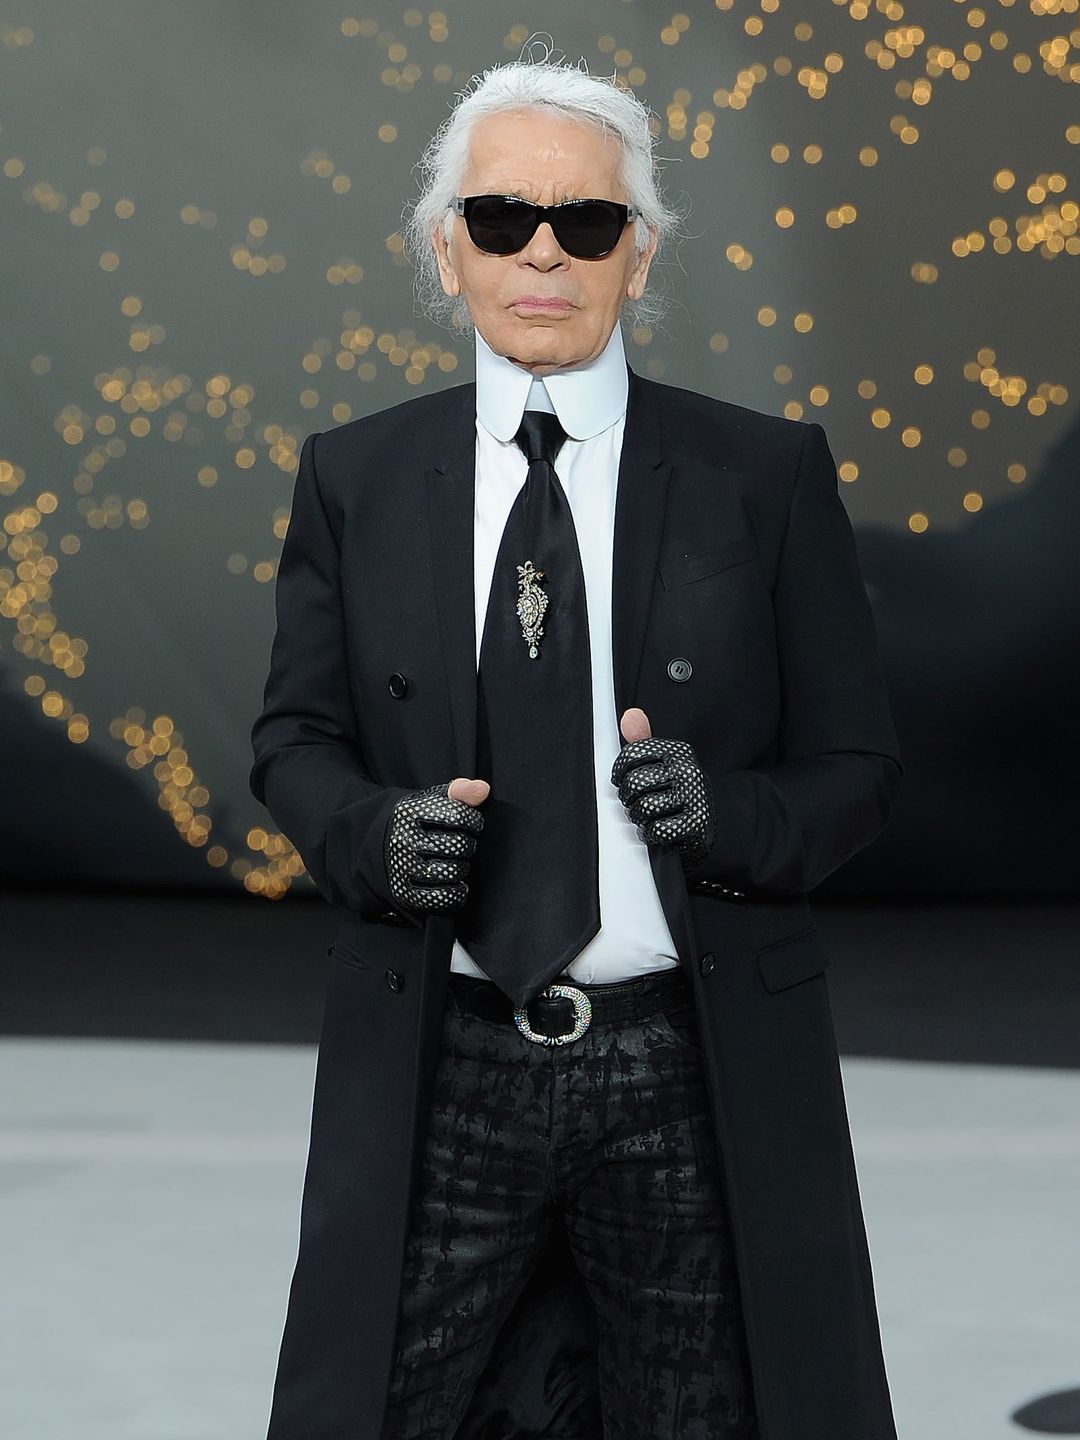 This year's theme centres around honouring the work of designer Karl Lagerfeld 